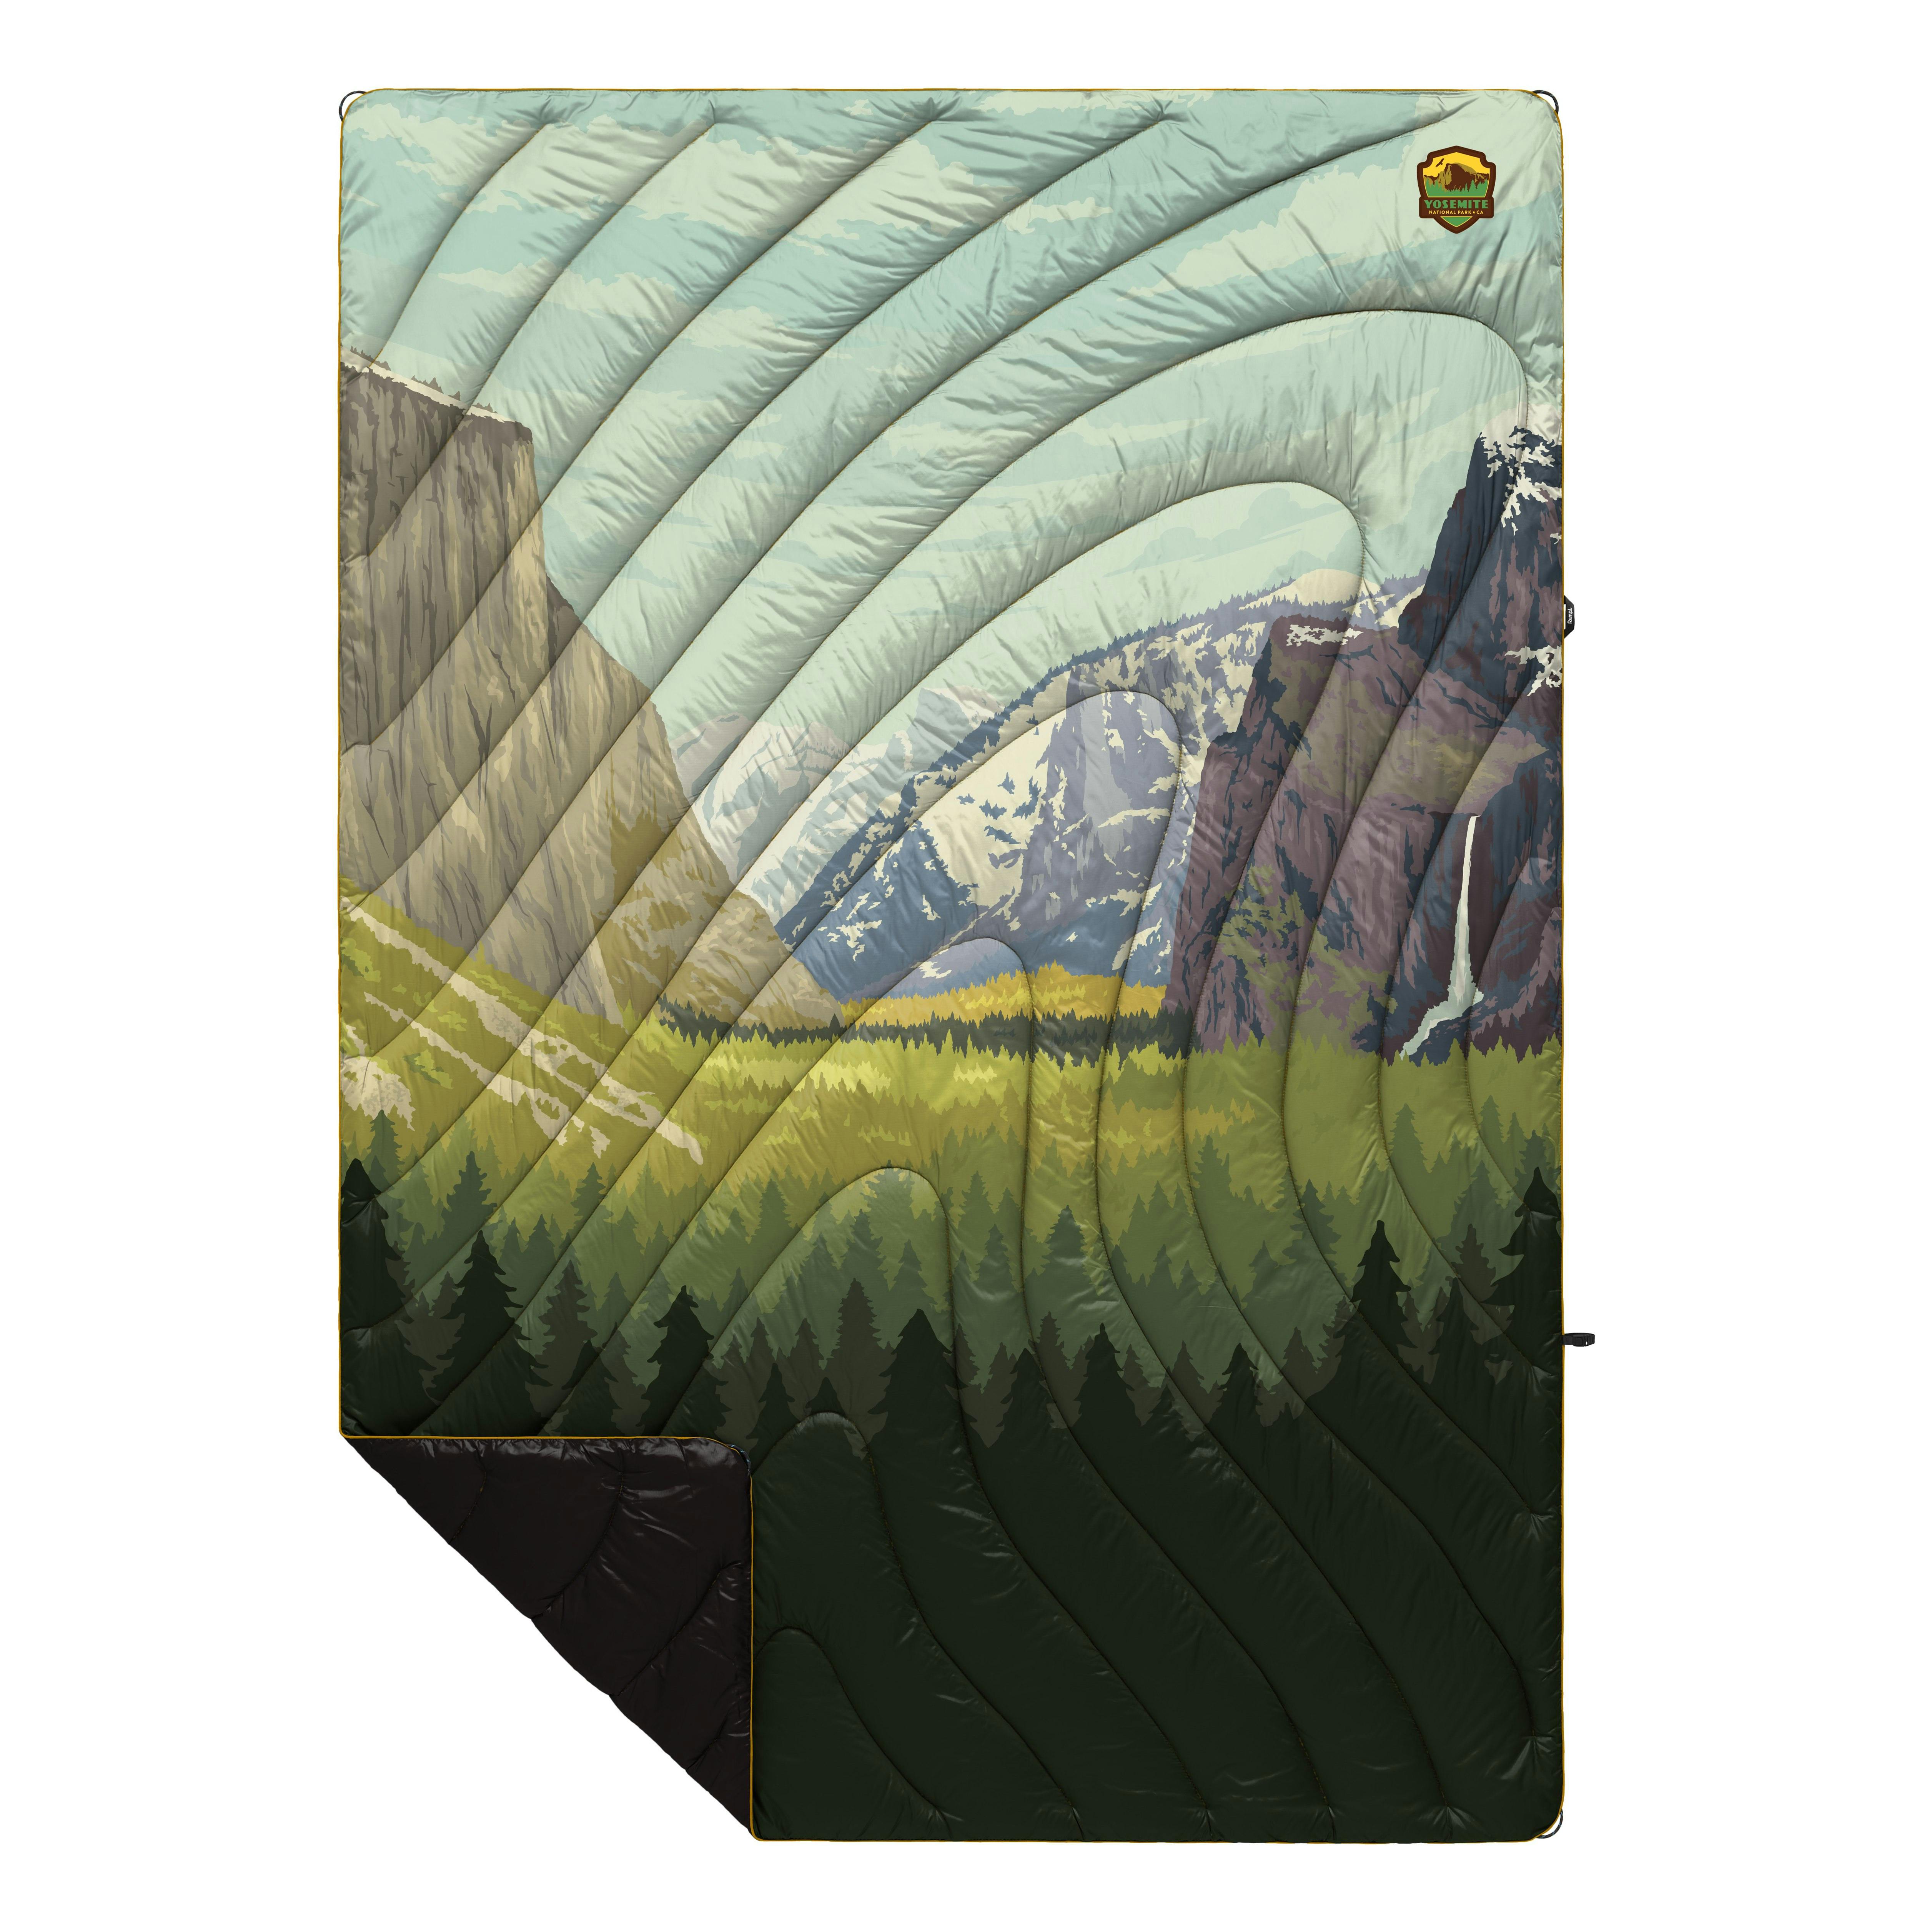 The Original Puffy Blanket - Yosemite - National Parks Collection